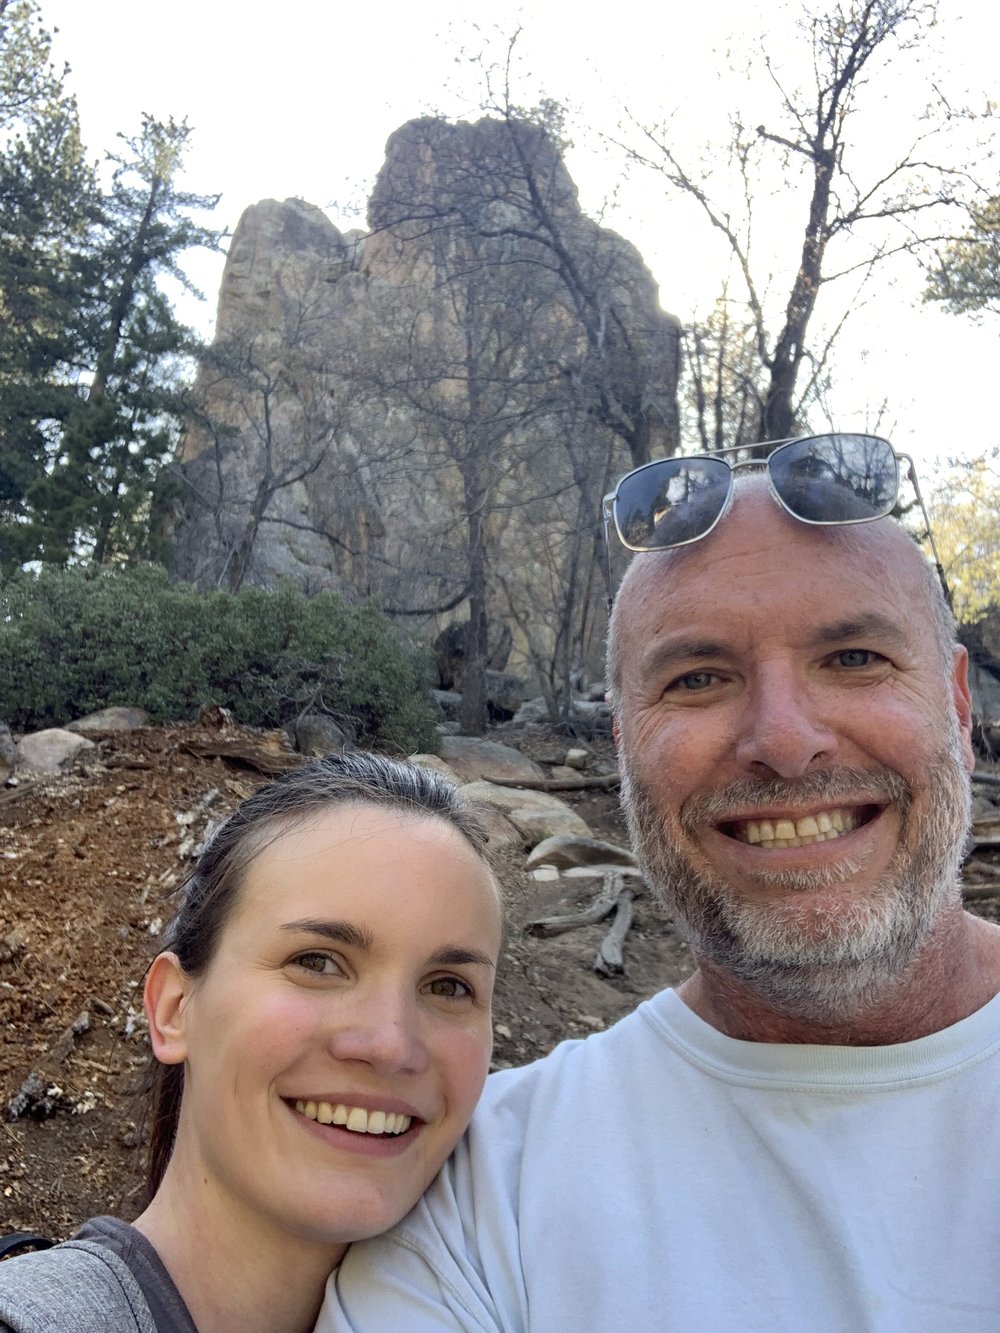 This is me and my daughter Carly making our ascent toward Castle Rock (in the background) above Big Bear Lake California. As we hiked, bouldered and climbed, I had 5 powerful things illustrated to me as a Connector in a local church. Scroll down this photo journal to see what I learned.